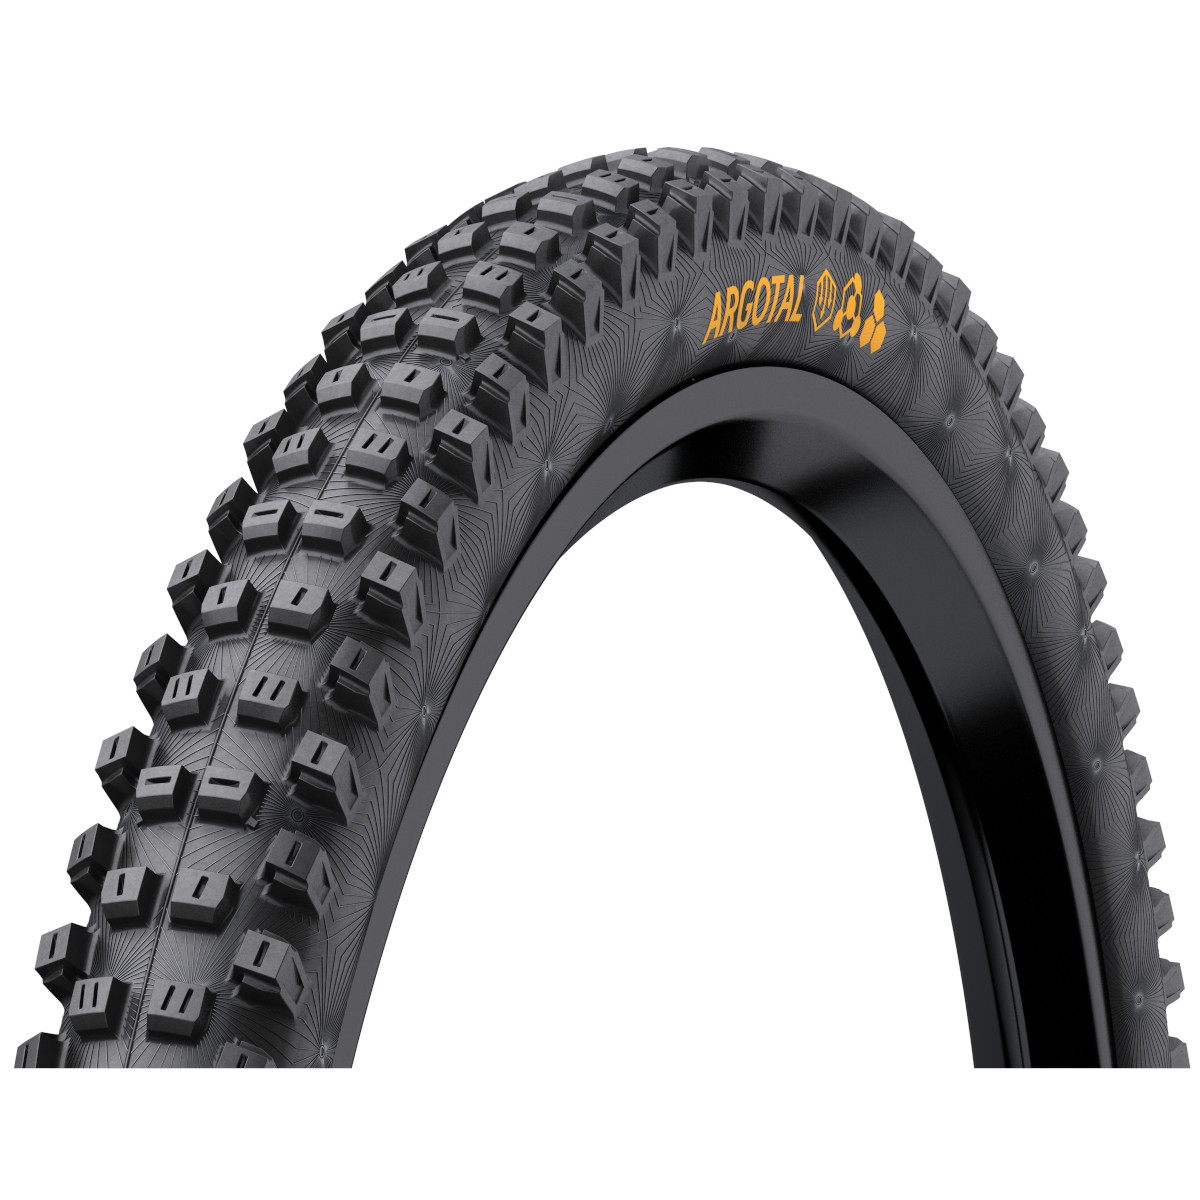 Image of Continental Argotal - Downhill SuperSoft - MTB Folding Tire - 29x2.40"